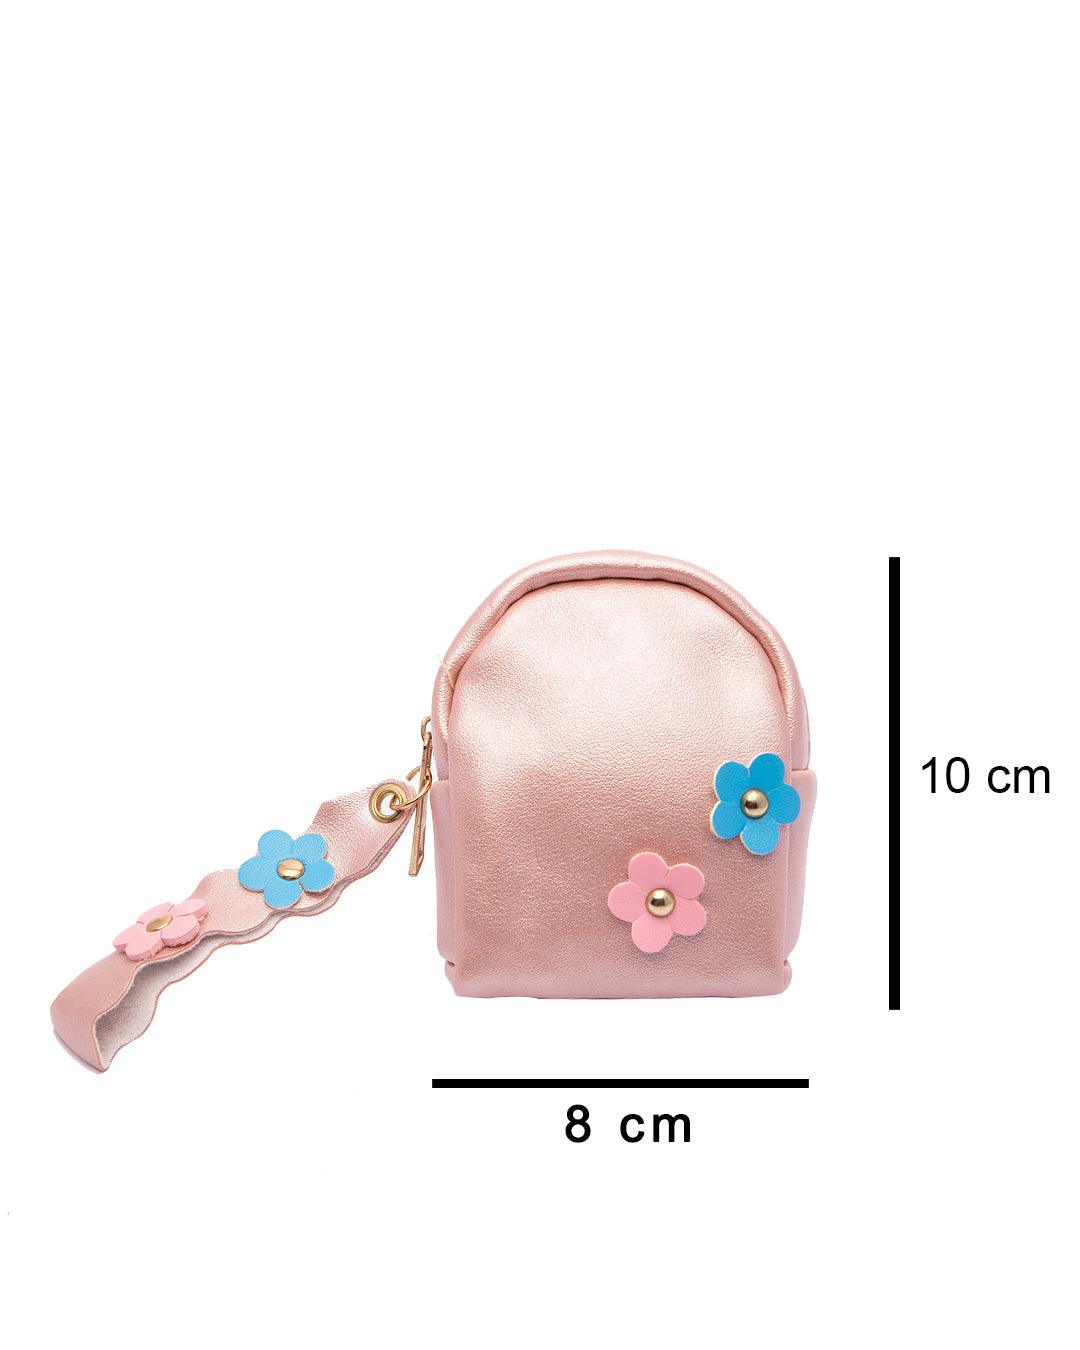 Buy Baby Girl Purse / Small Shoulder Bag for Kids Online in India - Etsy